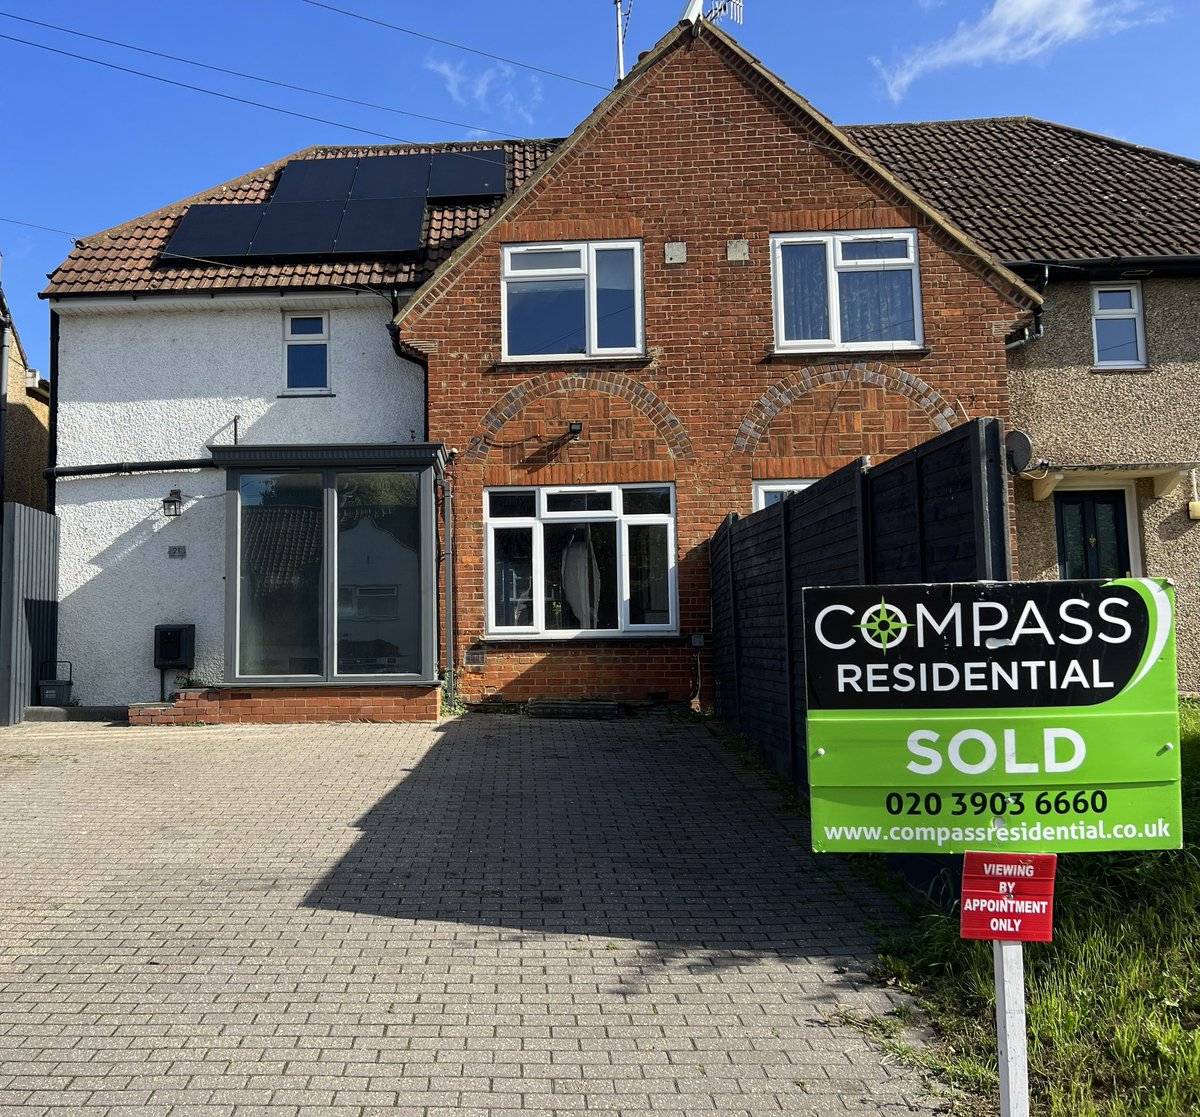 Lovely young couple as new owners in #kingslangley
#sold #hertfordshire #firsttimebuyers #fridayfeeling #weekendbuzz @compassresiden1